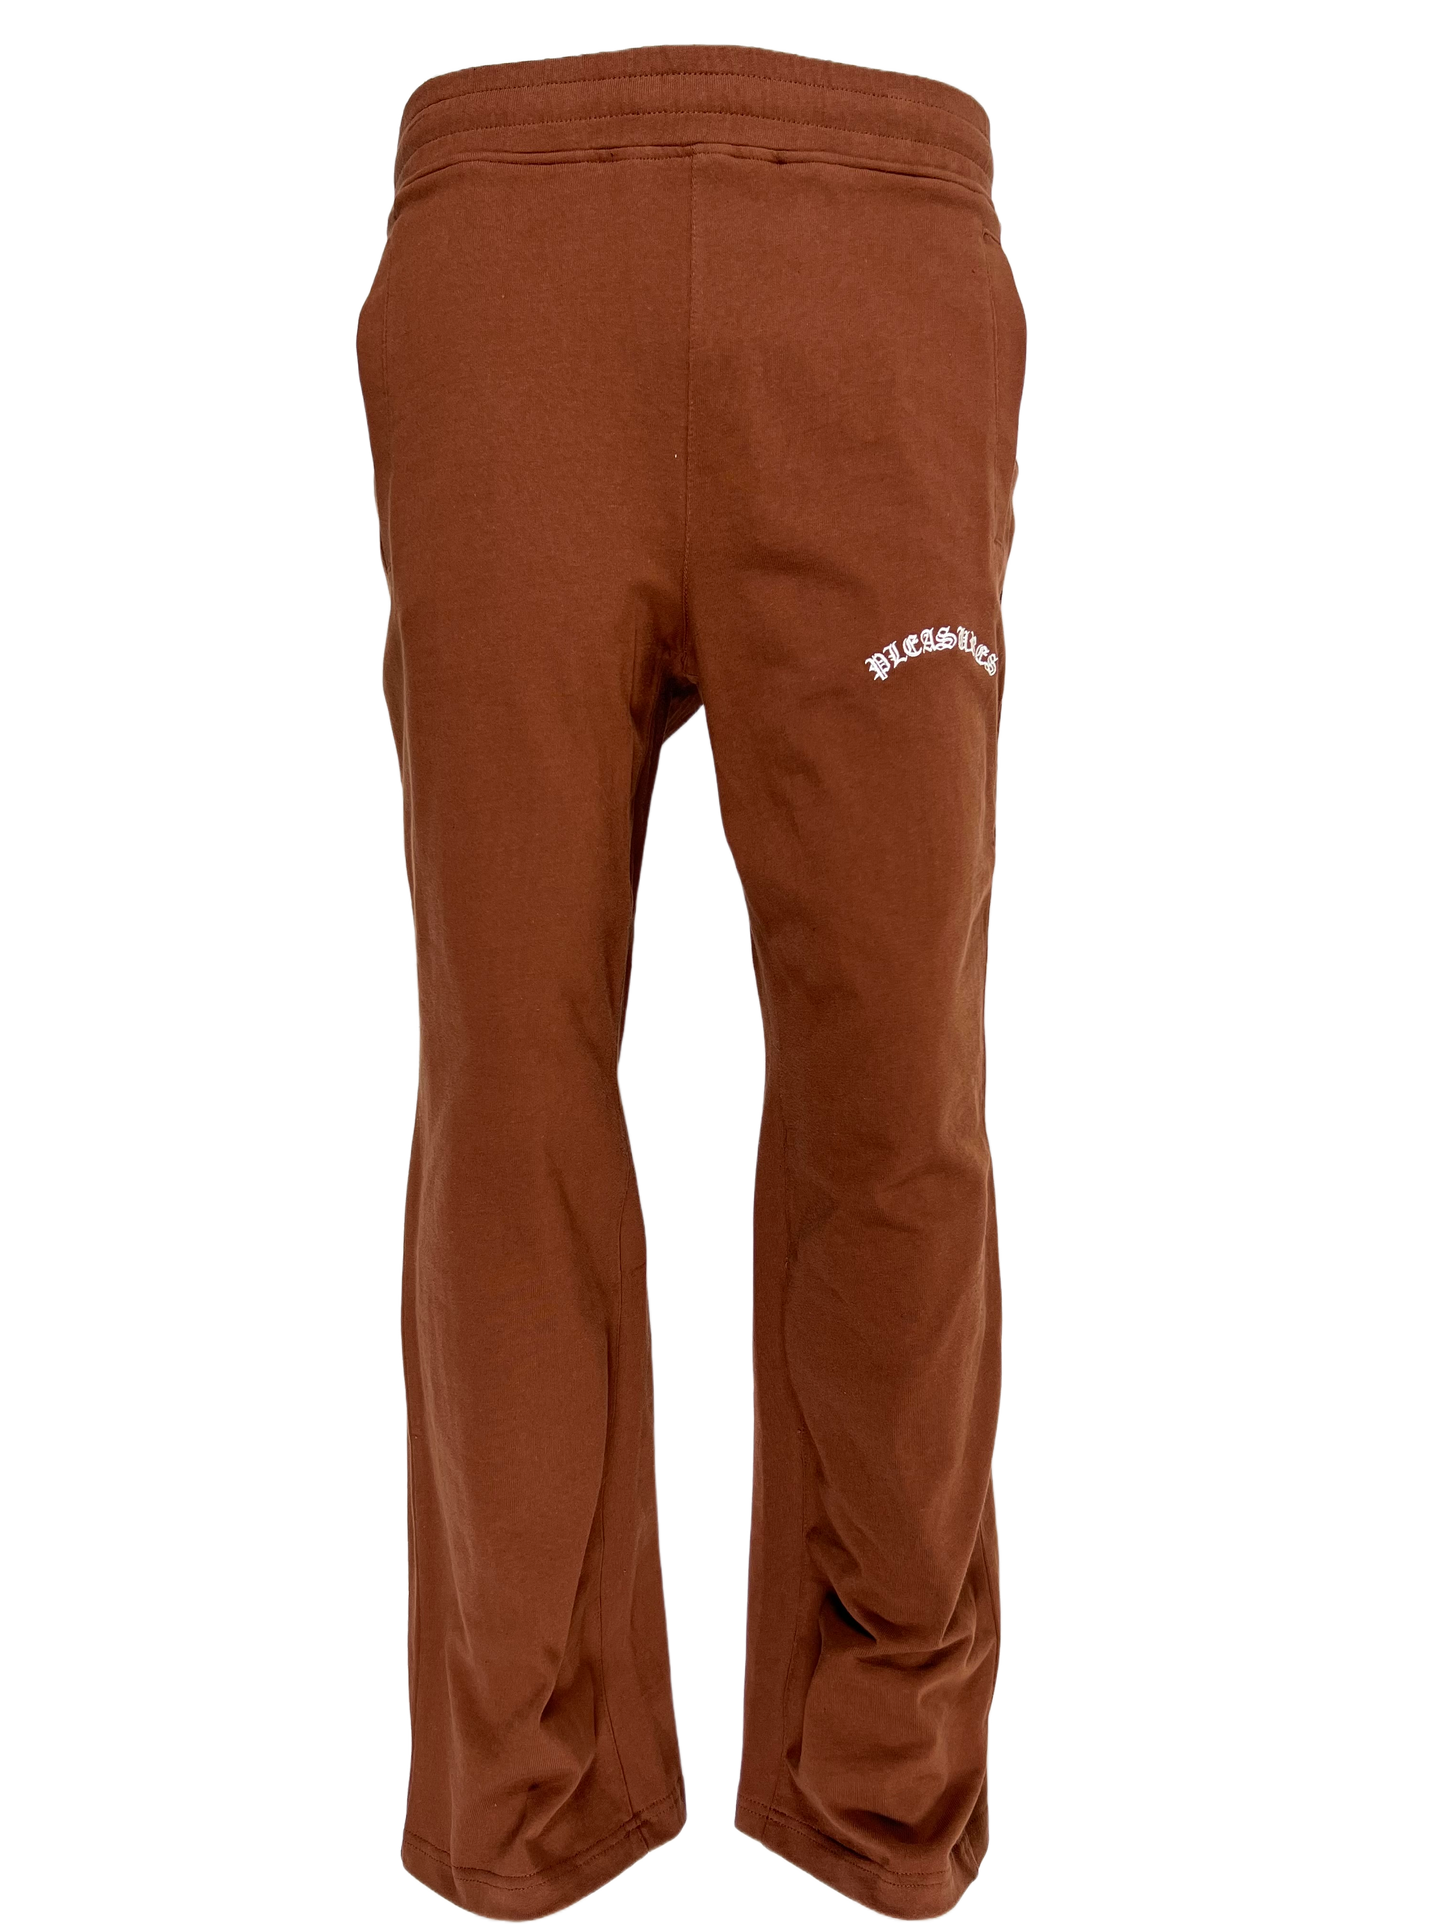 A PLEASURES brown cotton sweatpants with an embroidered leg branding.